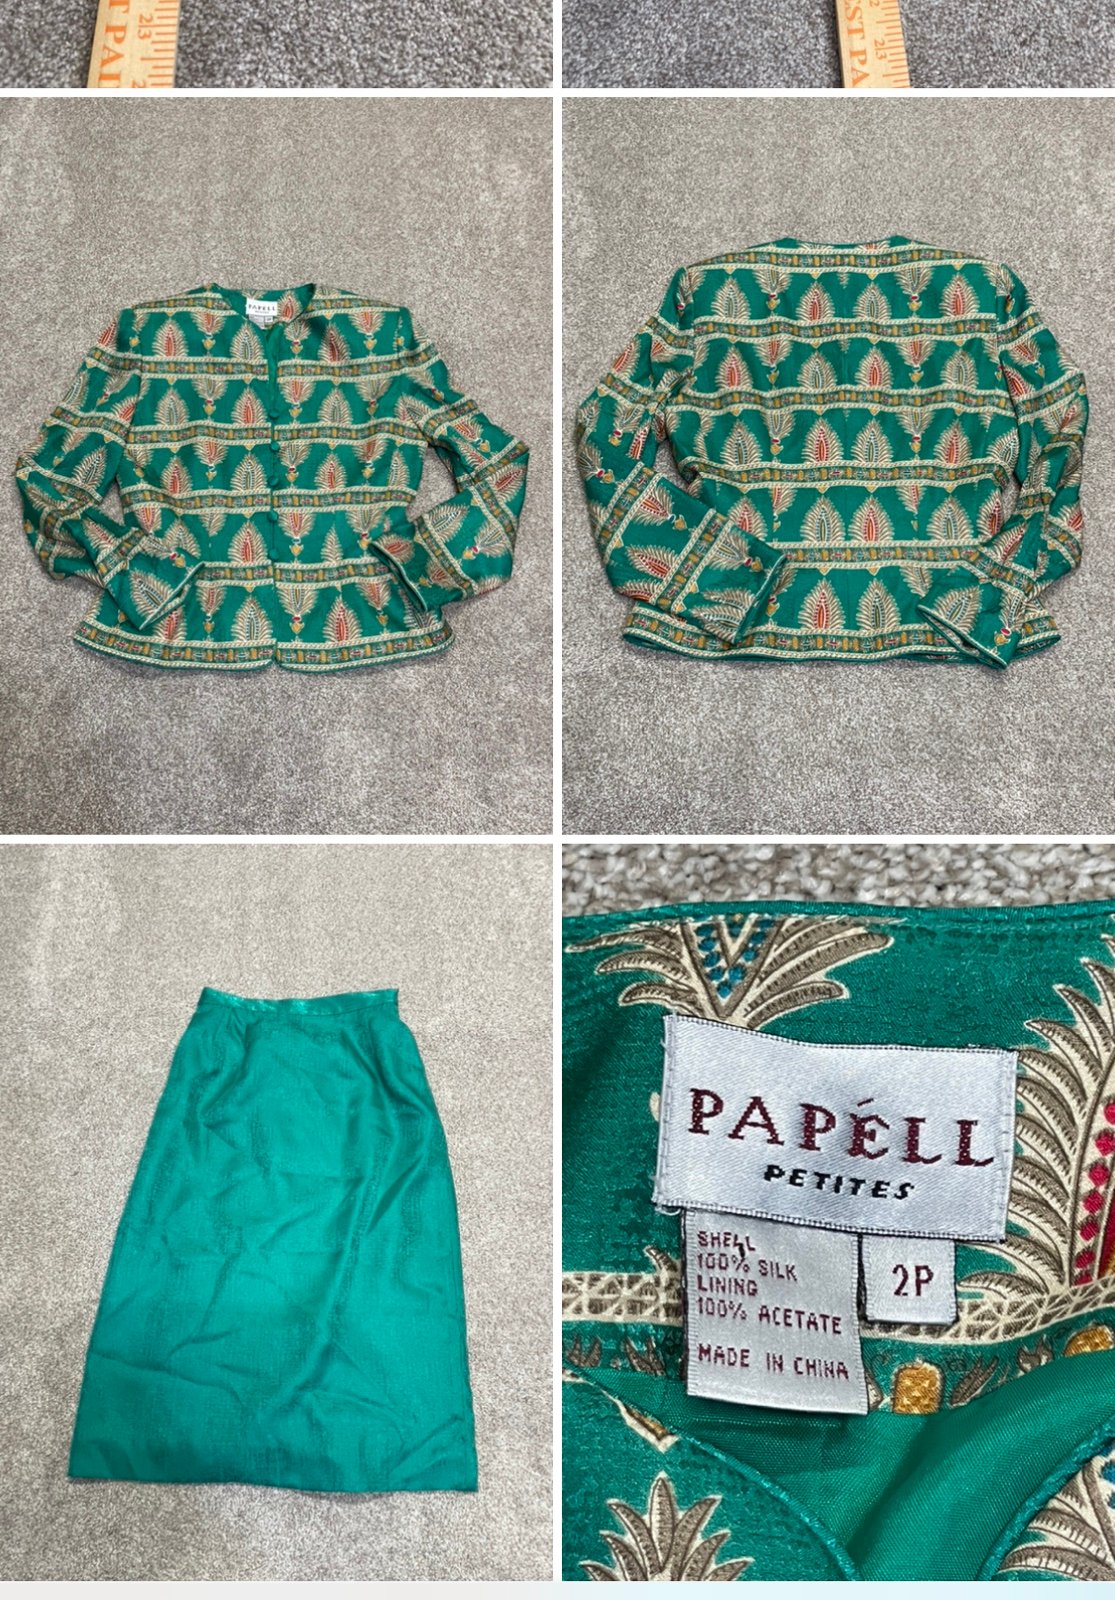 good price Adrianna Papell womens dress suit 2 piece set sz 2P green gold floral silk ncMhrnDhv Outlet Store